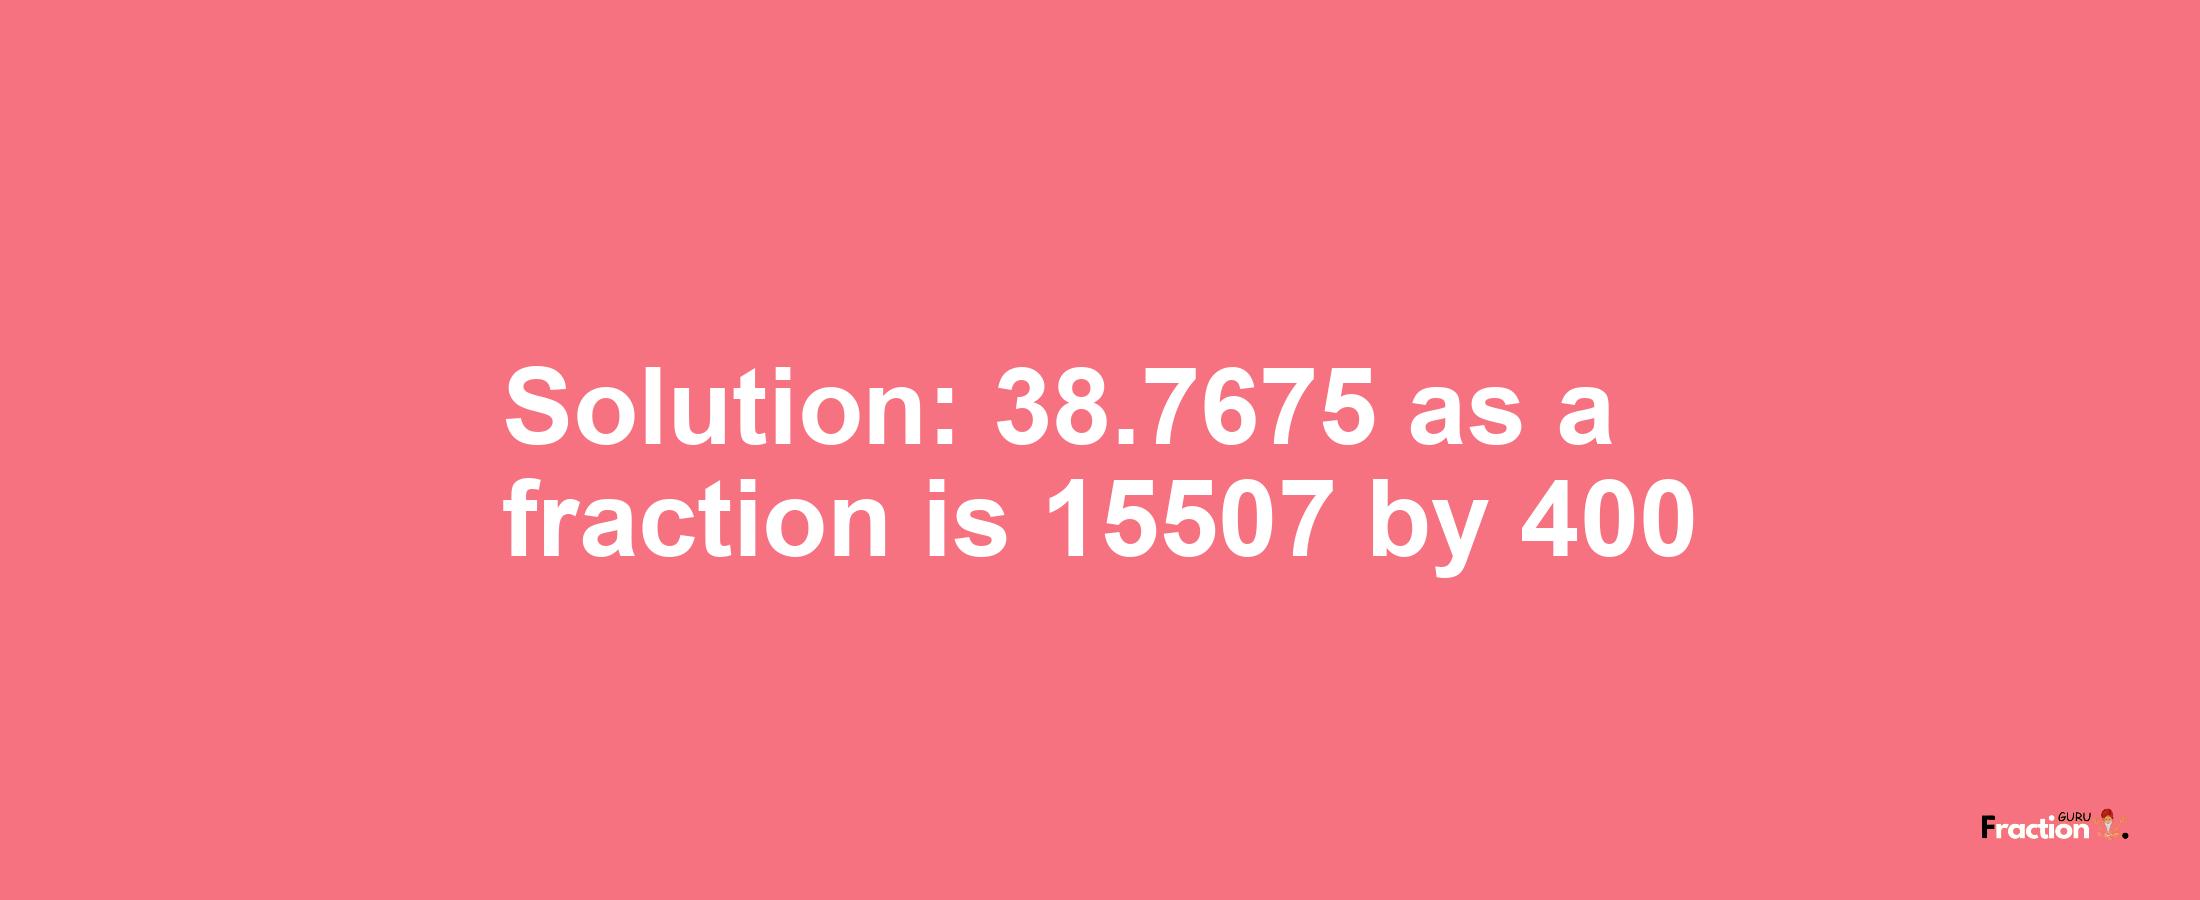 Solution:38.7675 as a fraction is 15507/400